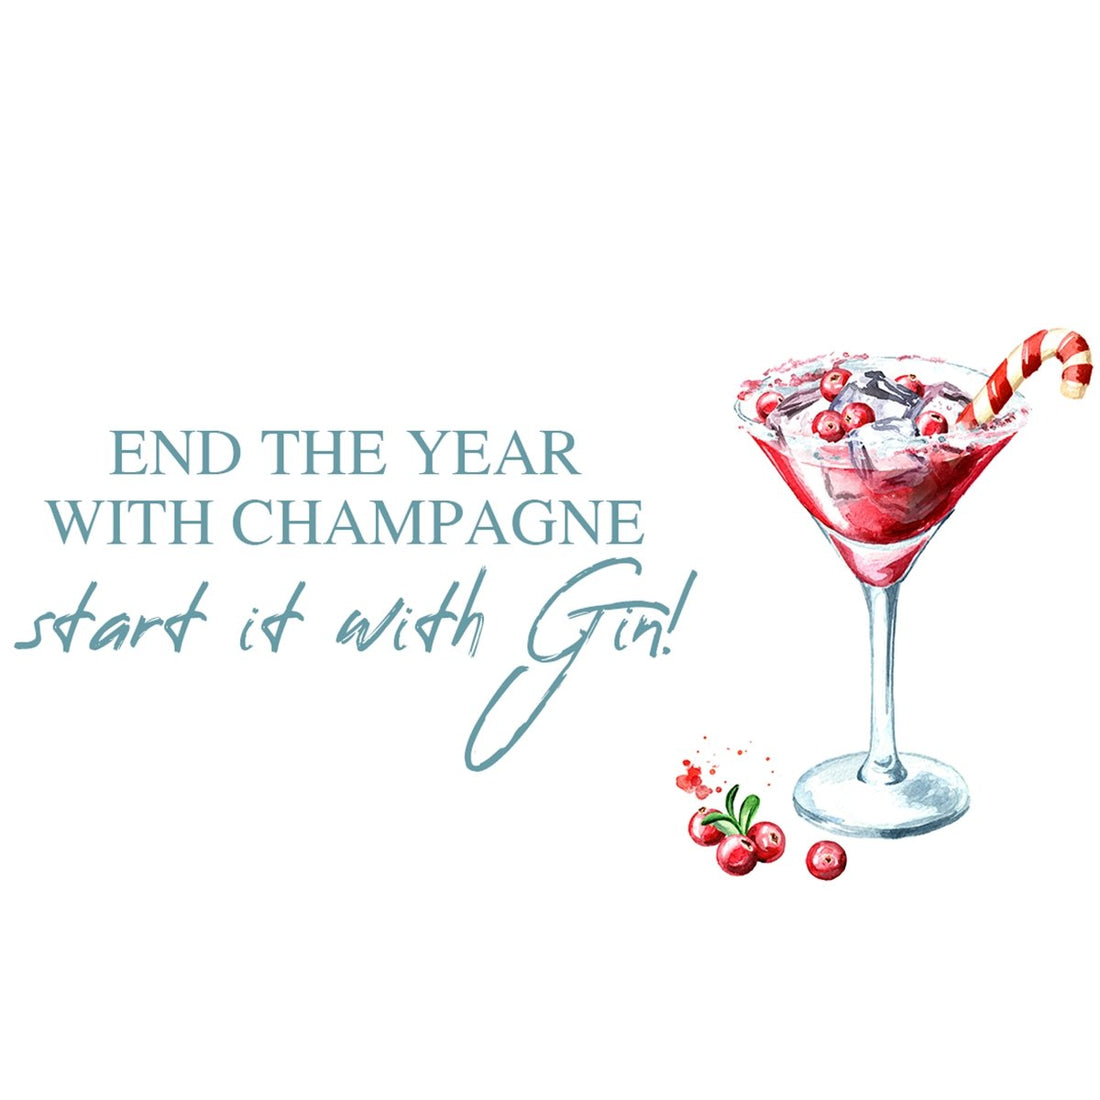 End the year with Champagne, start it with Gin! | MARC O'POLO by Mairinger